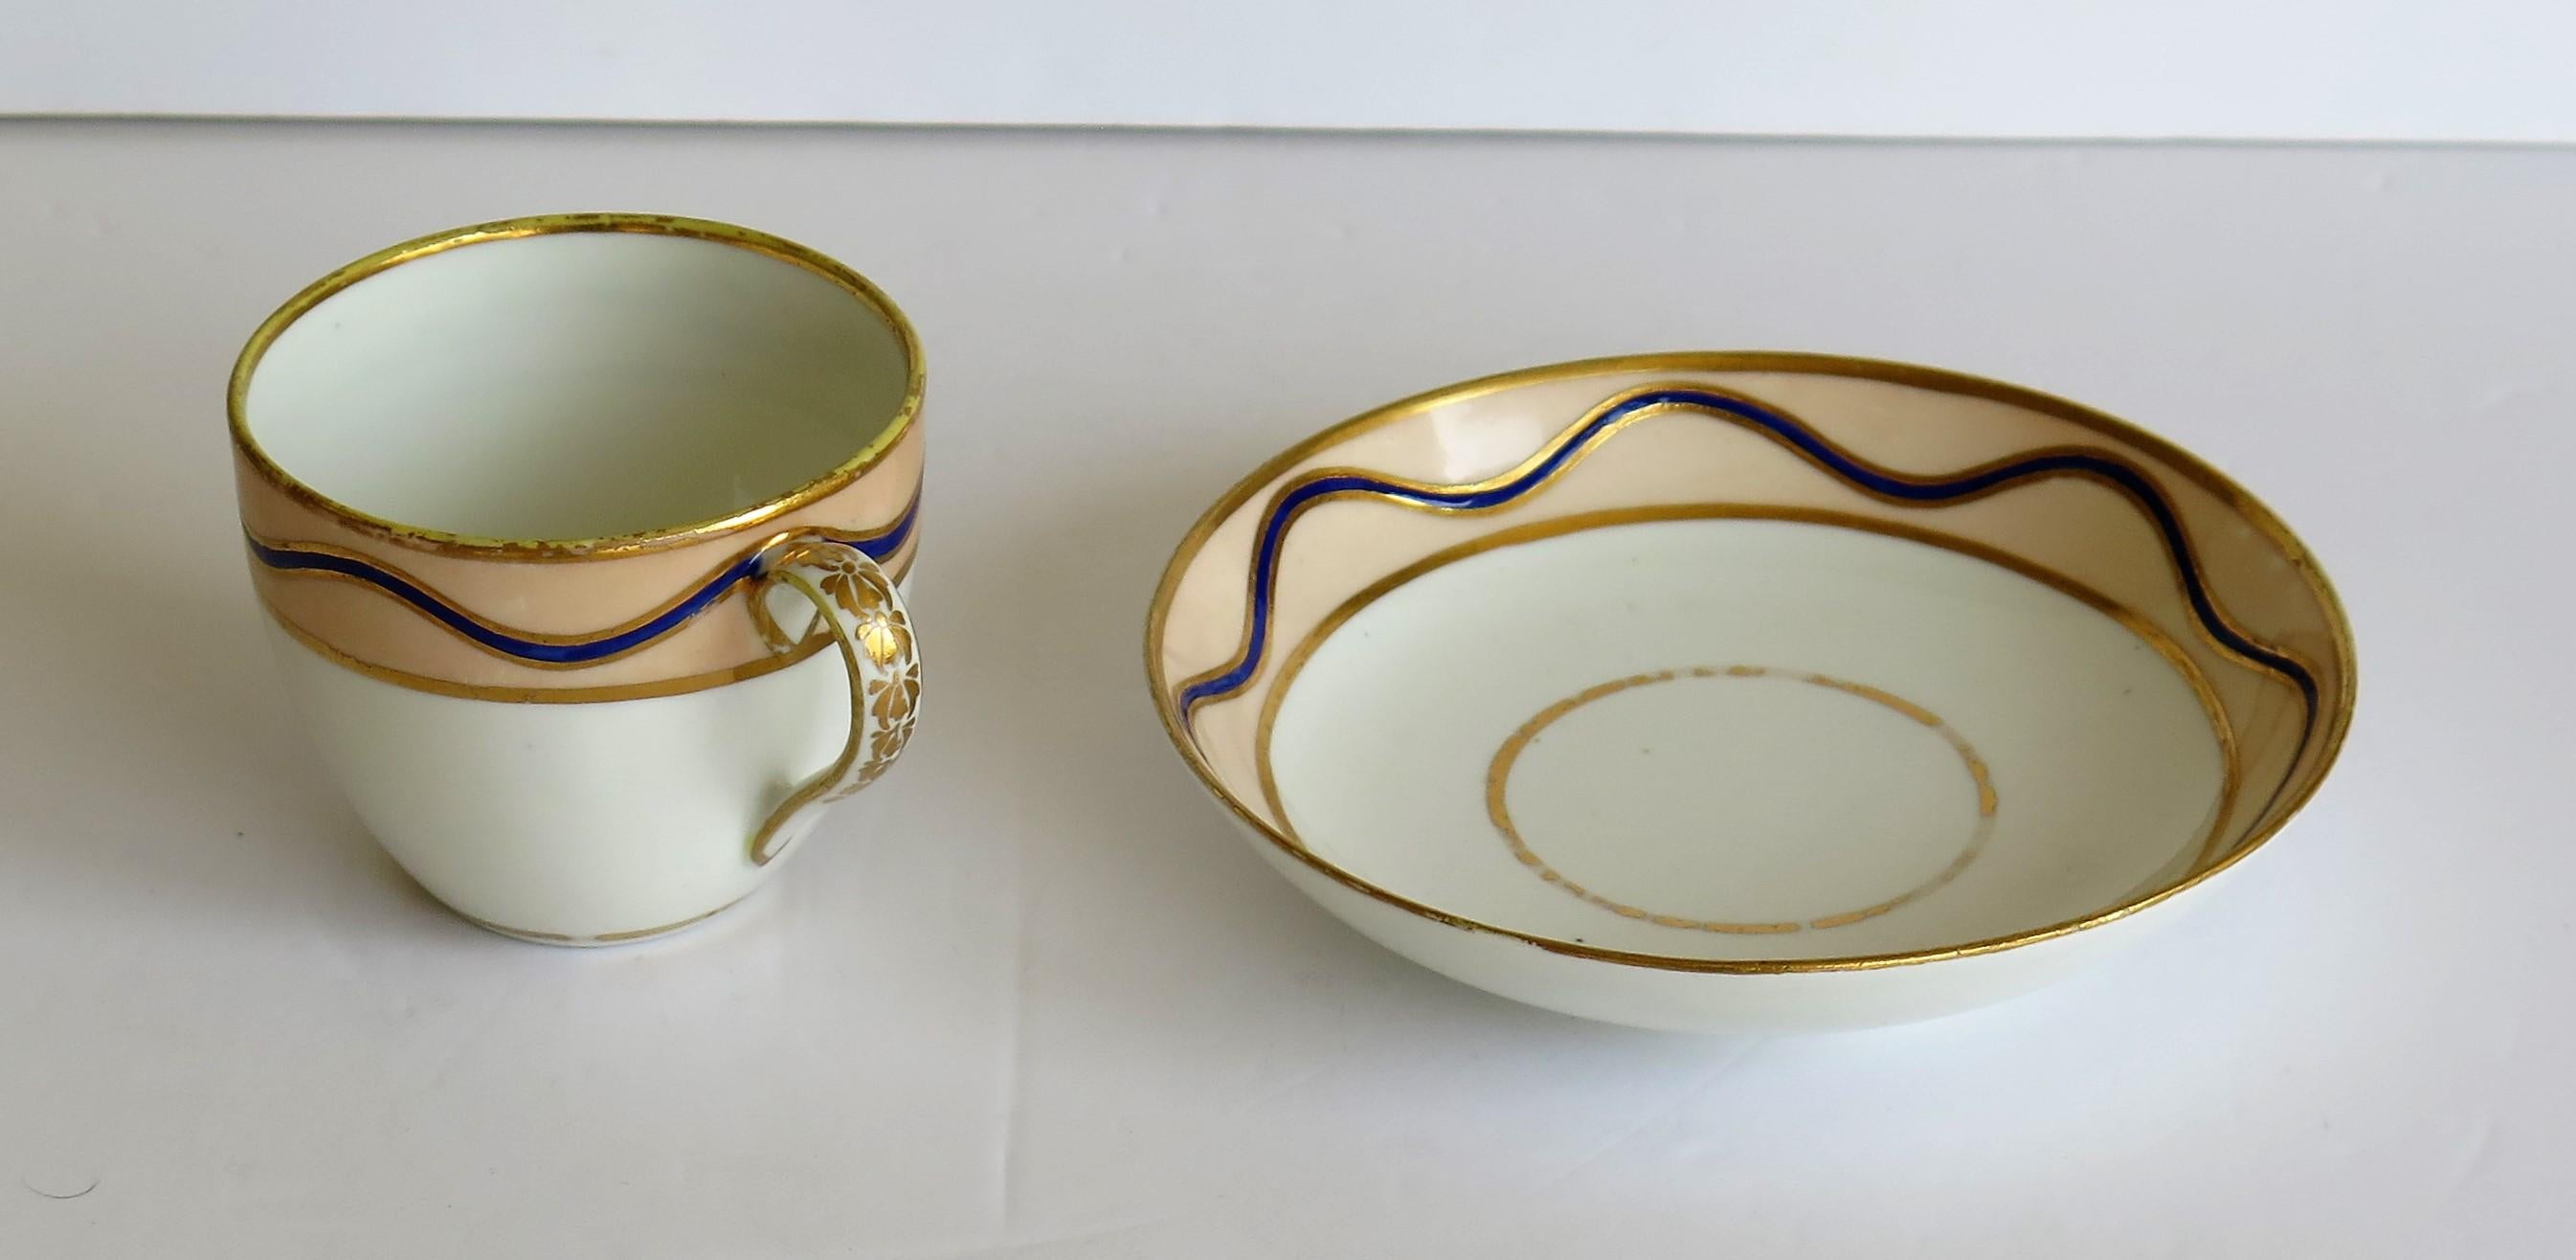 English Early Derby Porcelain Cup & Saucer Rare Pattern 128 Puce Crown Marks, circa 1795 For Sale